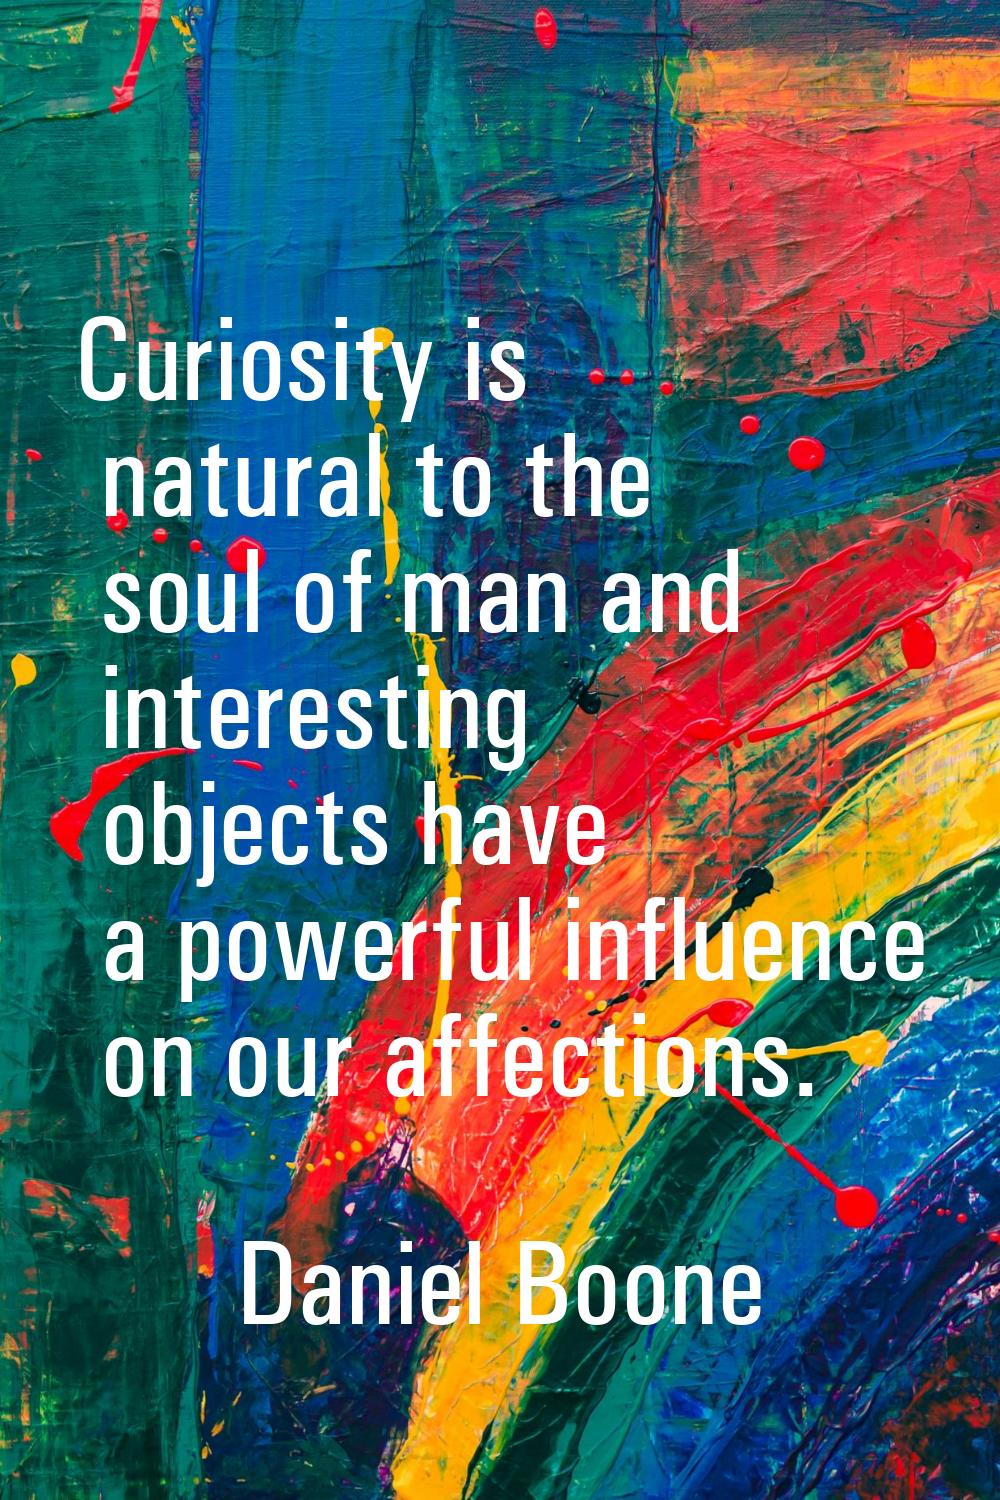 Curiosity is natural to the soul of man and interesting objects have a powerful influence on our af